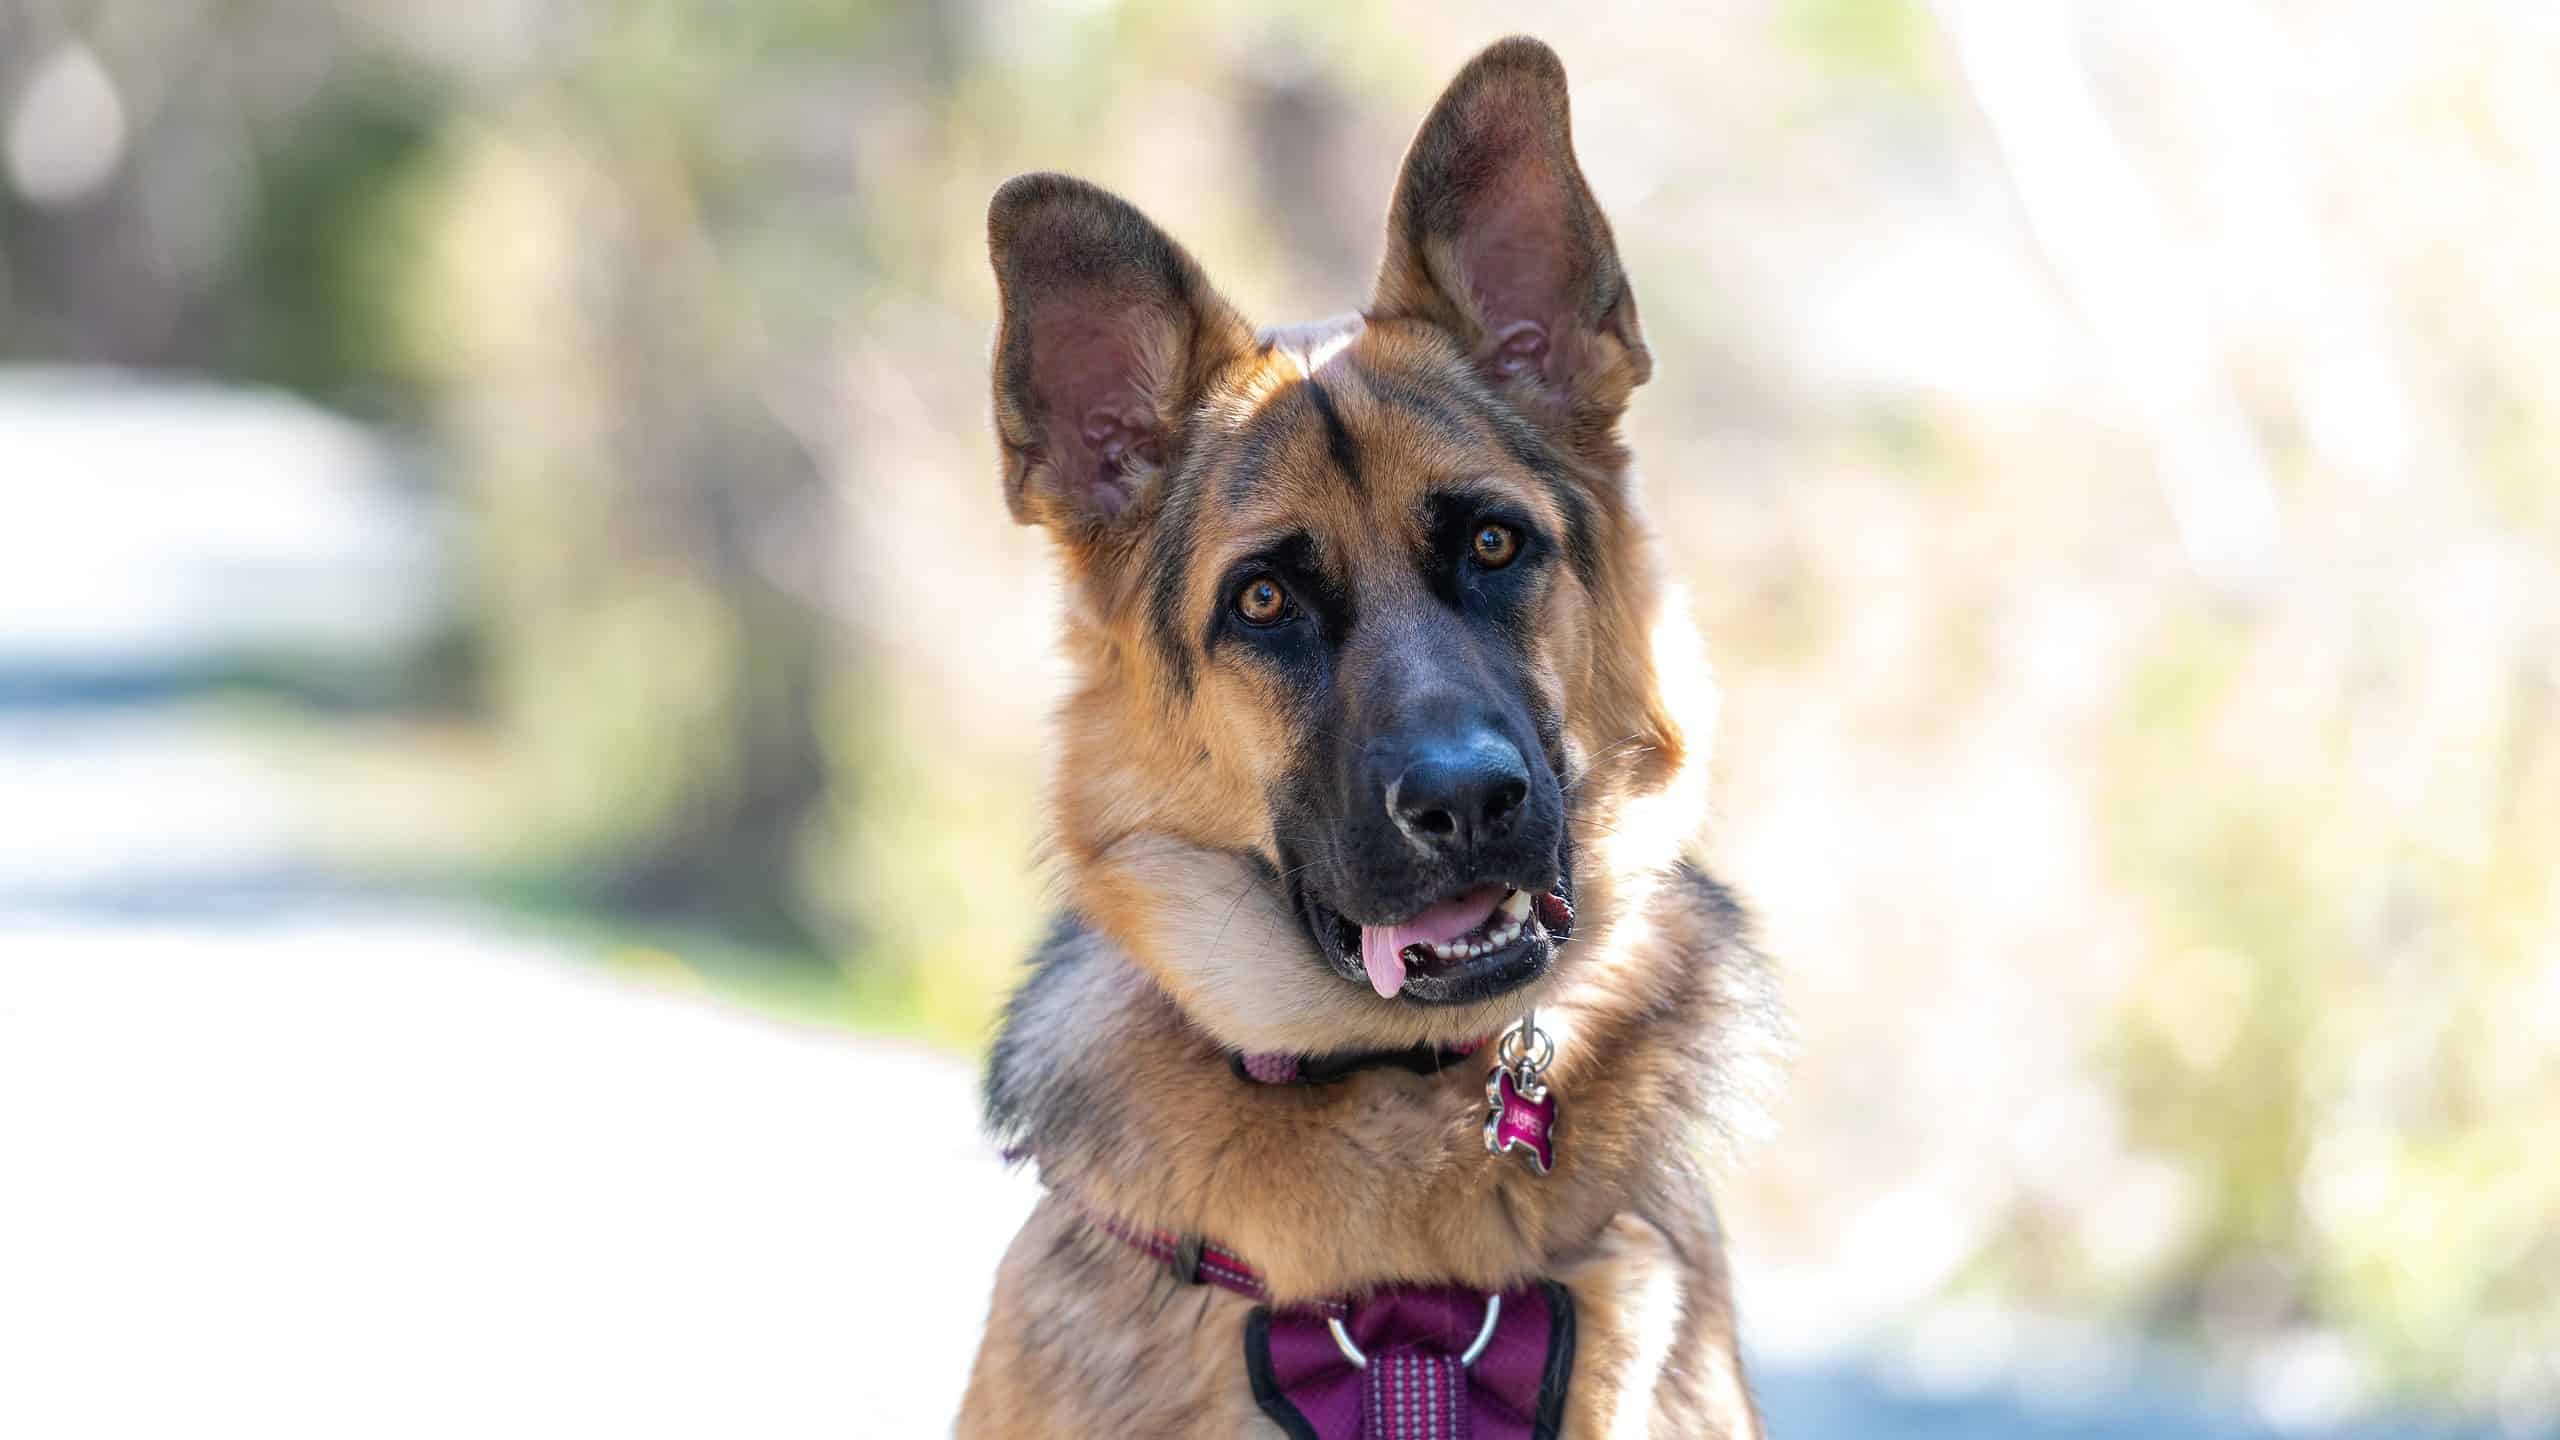 A young female German Sheppard dog sits attentively with its long tongue hanging out, ears up, and attentively wearing a pink harness and leash. The dog has thick black and brown fur.